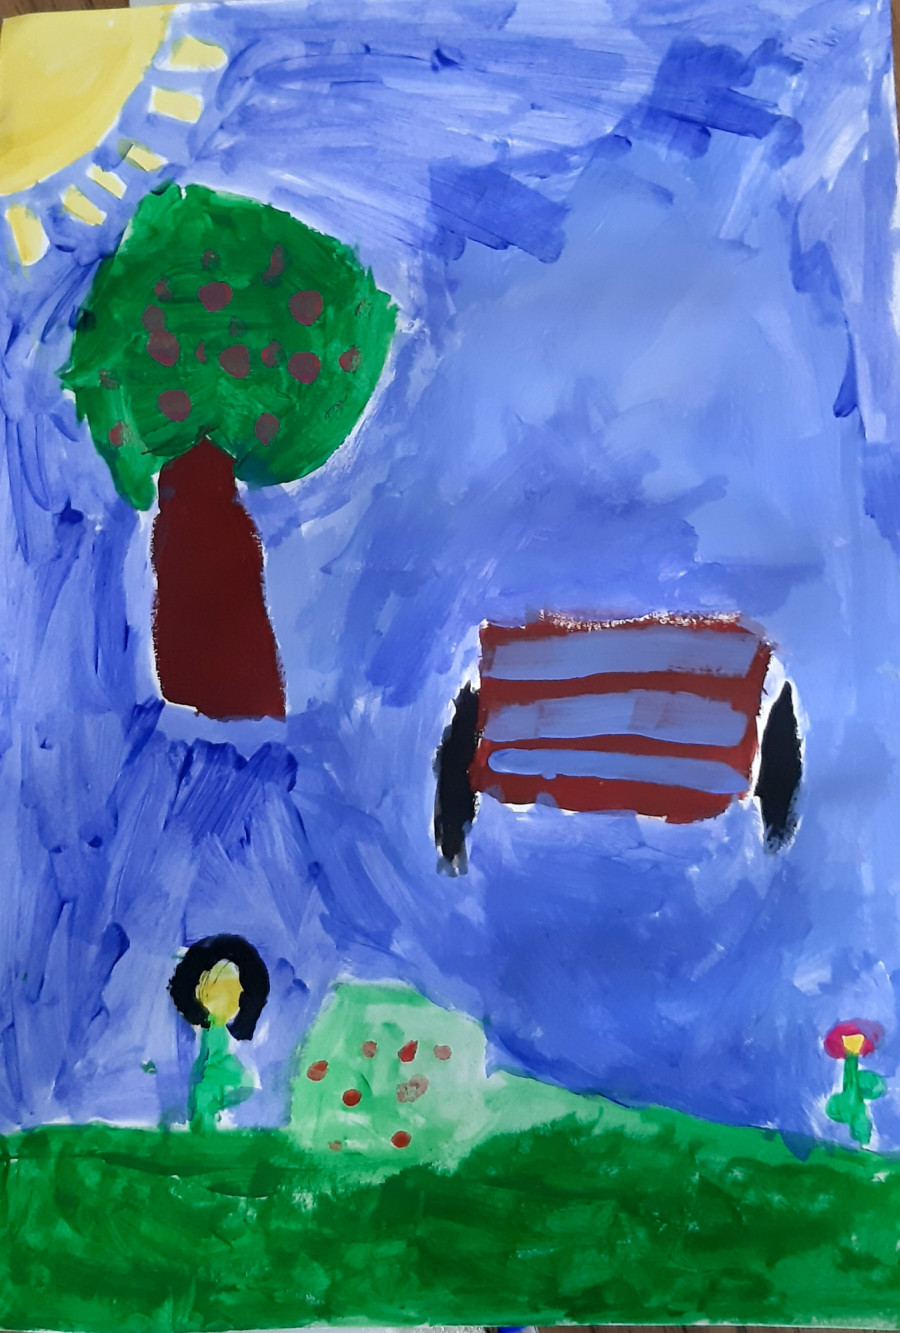 'The Magical Garden' by Tilly (7) from Cork